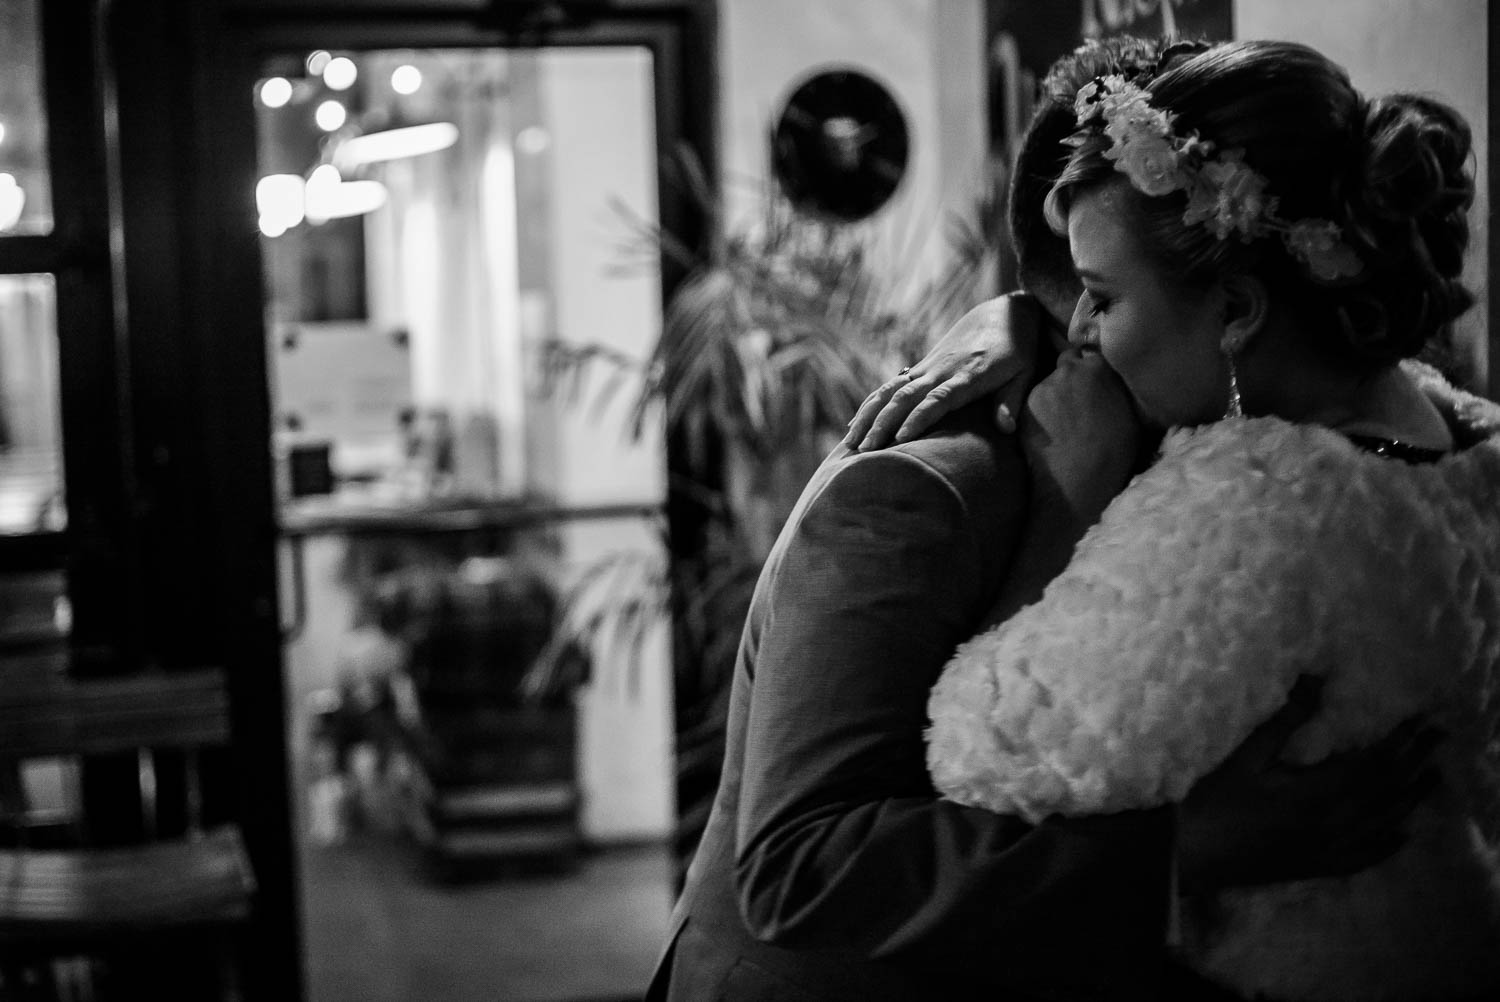 Moments after tying the knot couple embrace in quiet moment at Republic Takoma Park Washington D.C-Leica Wedding photographer-Philip Thomas